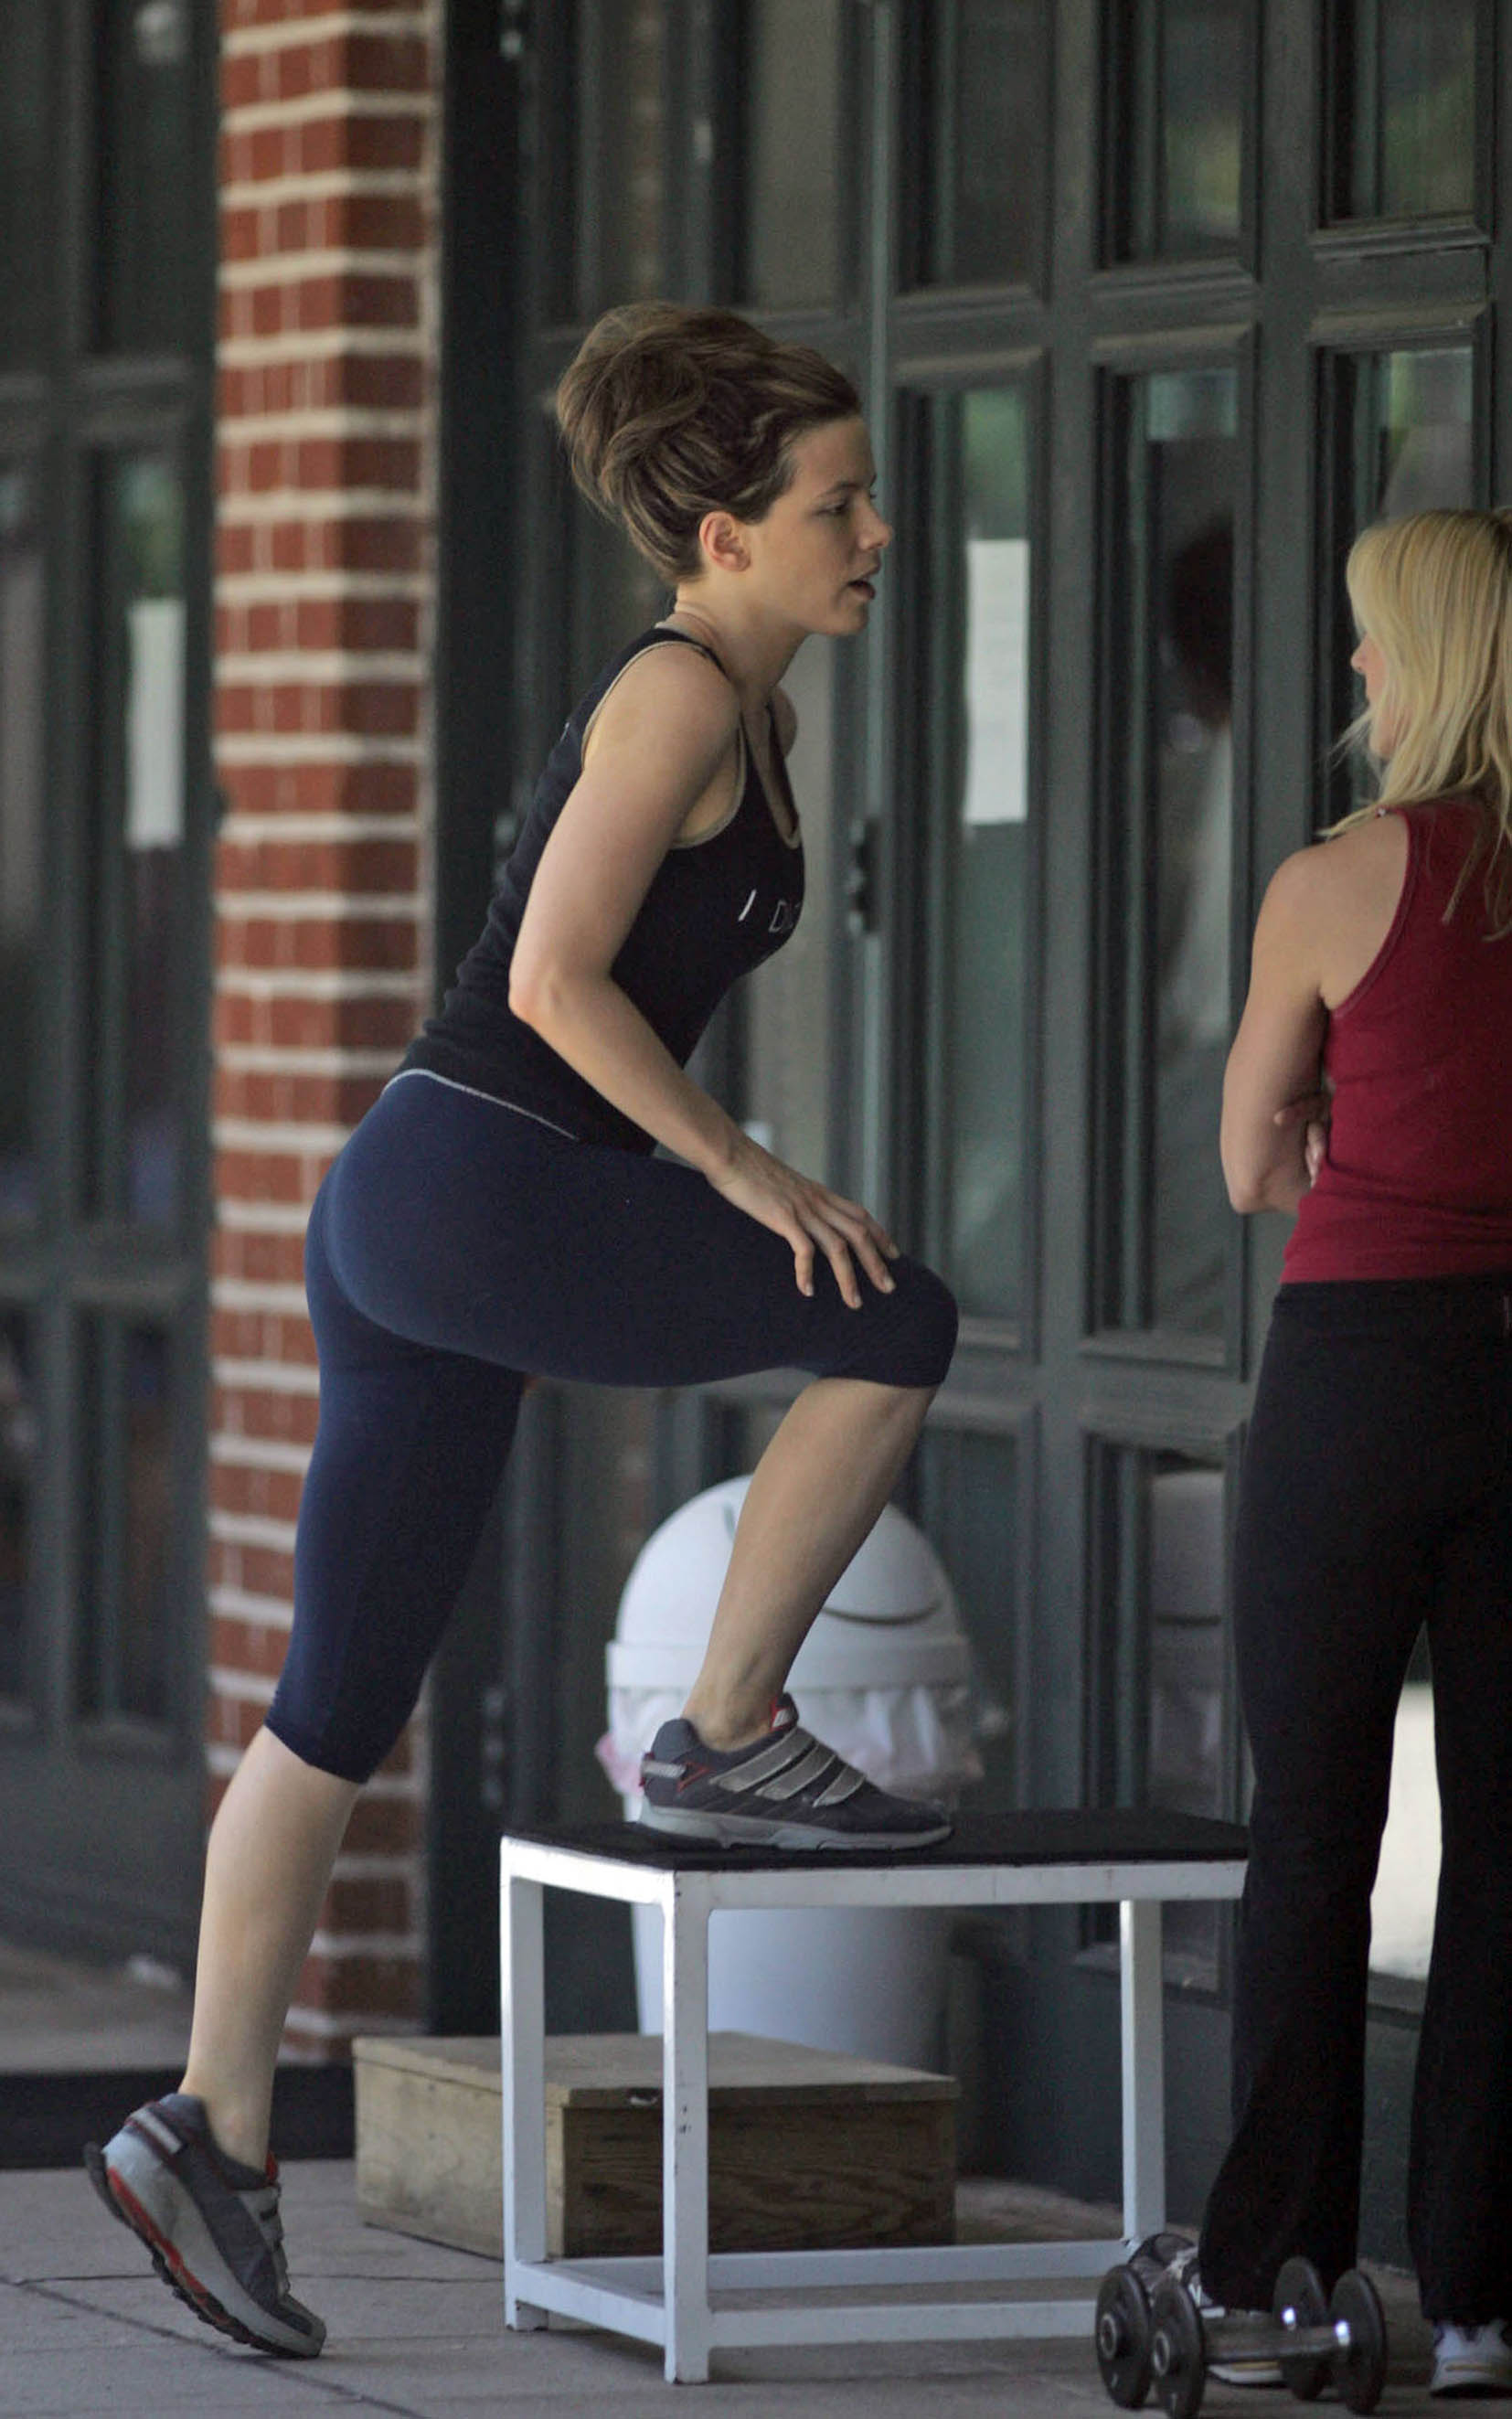 Kate Beckinsale working out in leggings Oct 2010